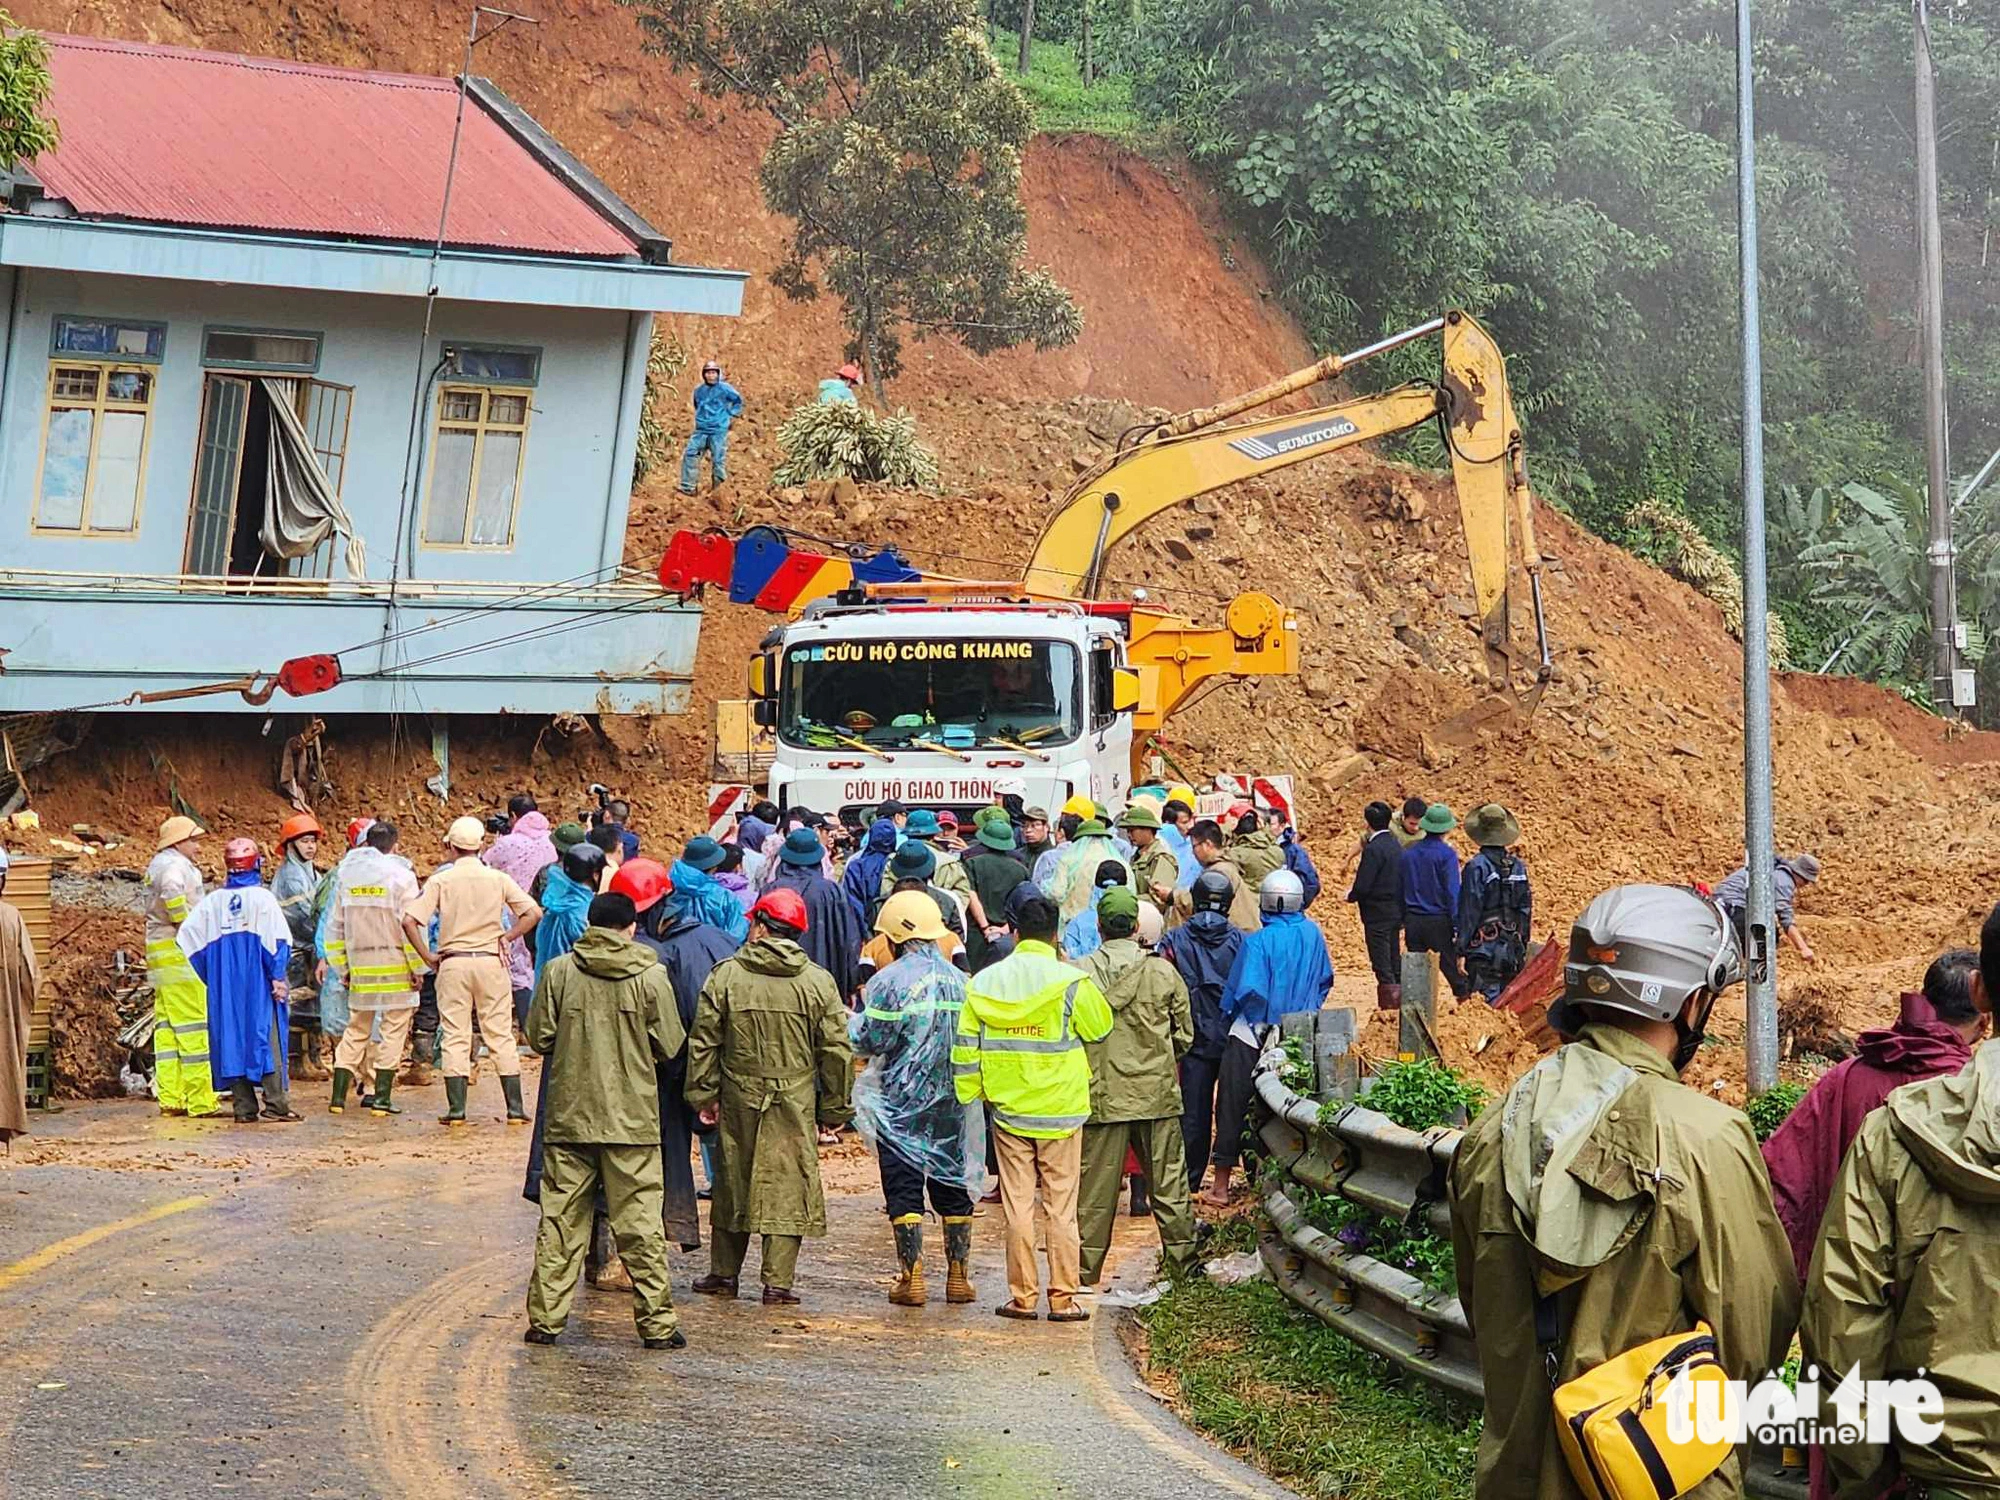 The scene of the fatal landslide, which took place in Lam Dong Province, Vietnam’s Central Highlands July 30, 2023. Photo: Son Dinh / Tuoi Tre